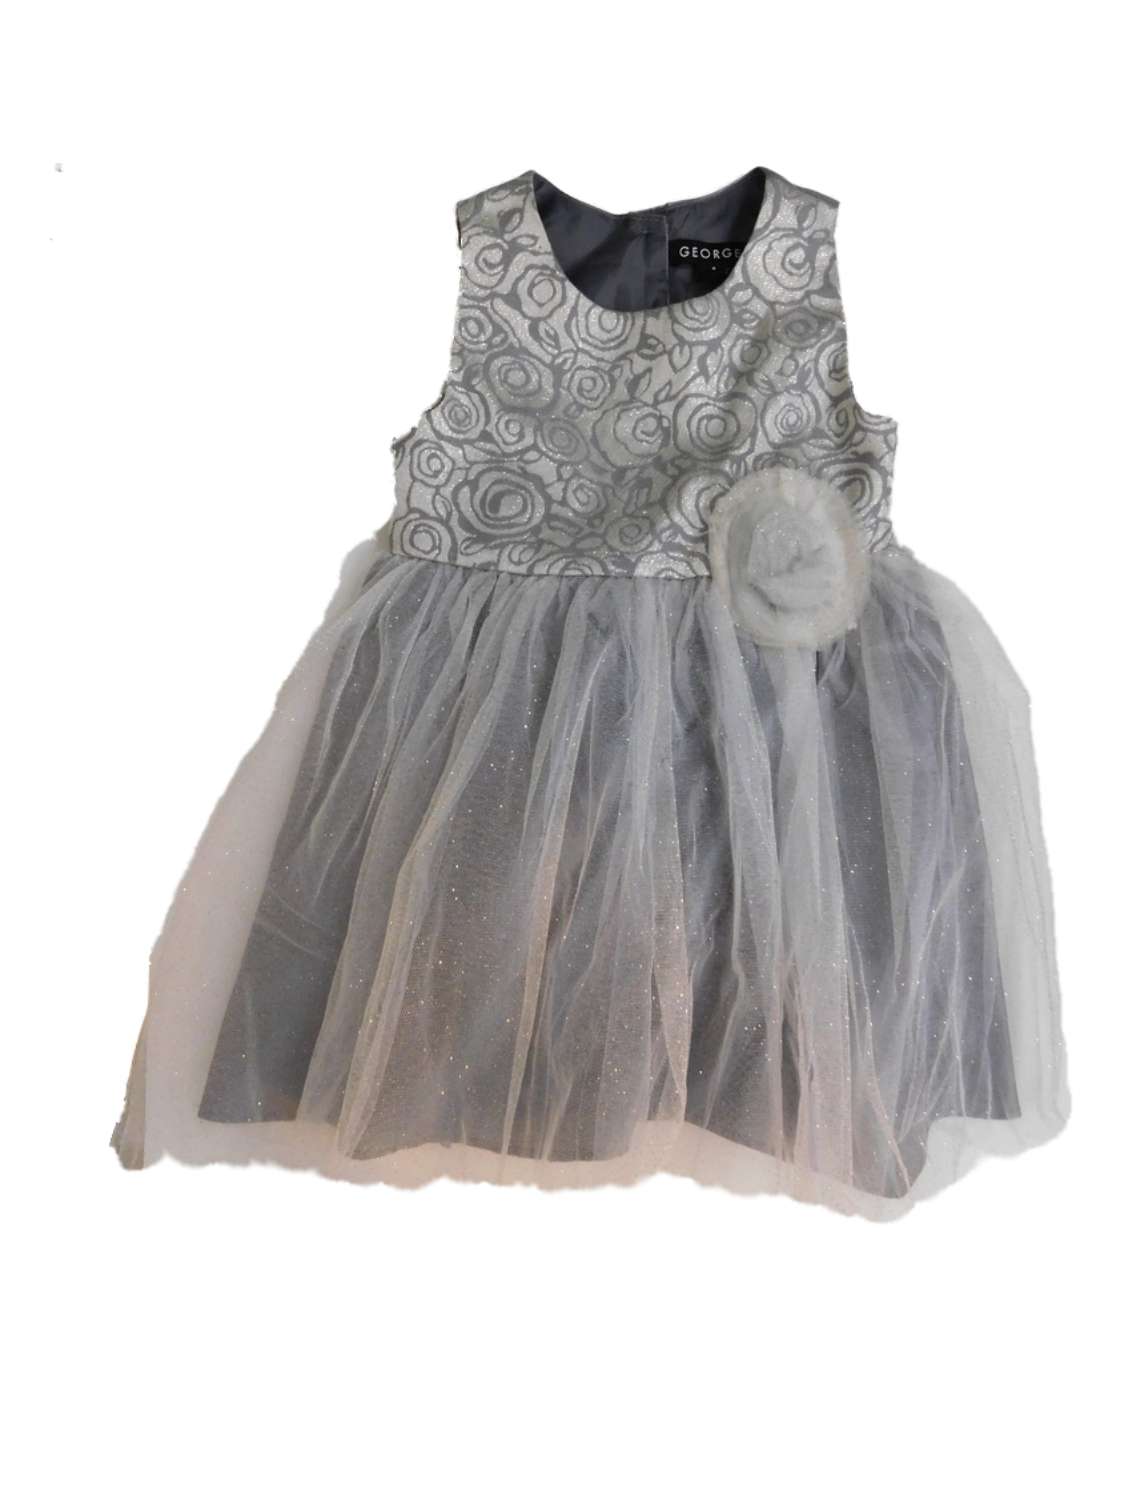 George Girls Gray Silver Sparkly Sleeveless Holiday Party Dress